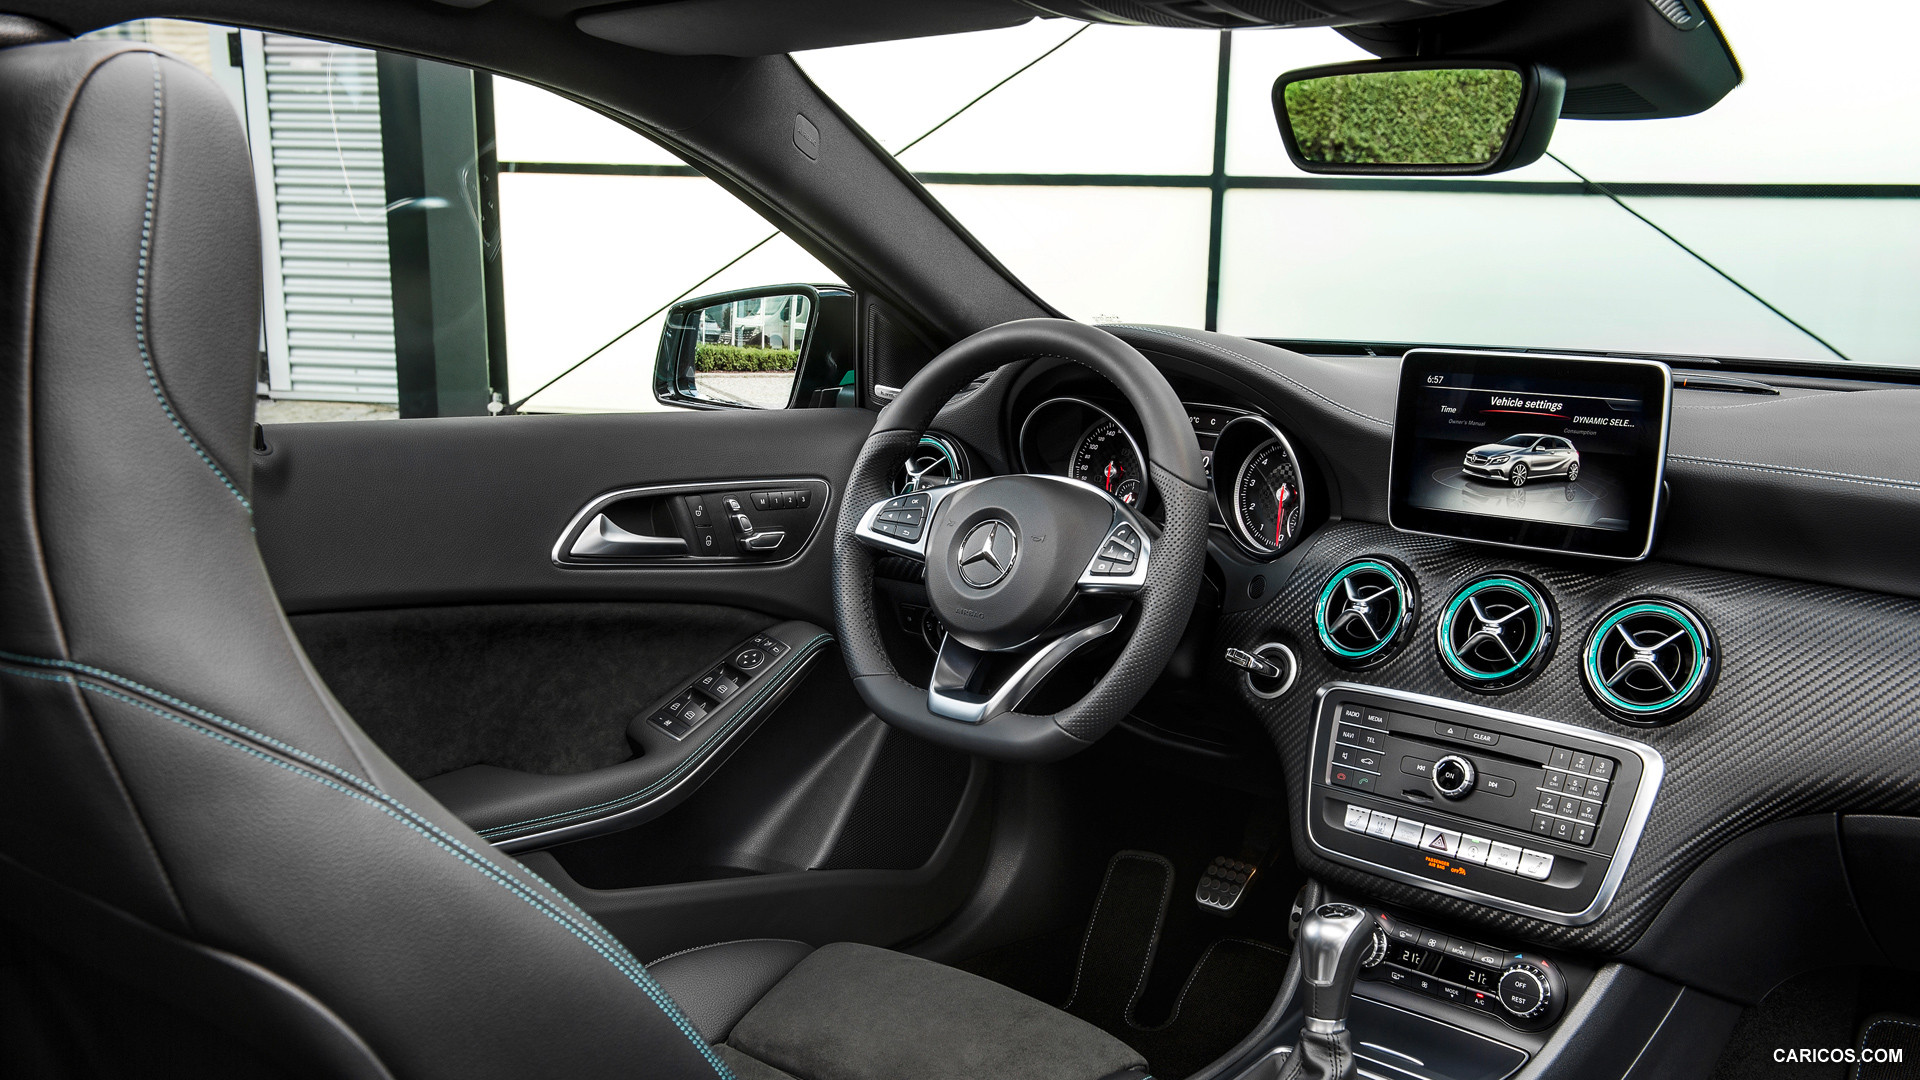 2016 Mercedes-Benz A-Class A 250 Motorsport Edition (Leather / DINAMICA Black) - Interior, #15 of 43